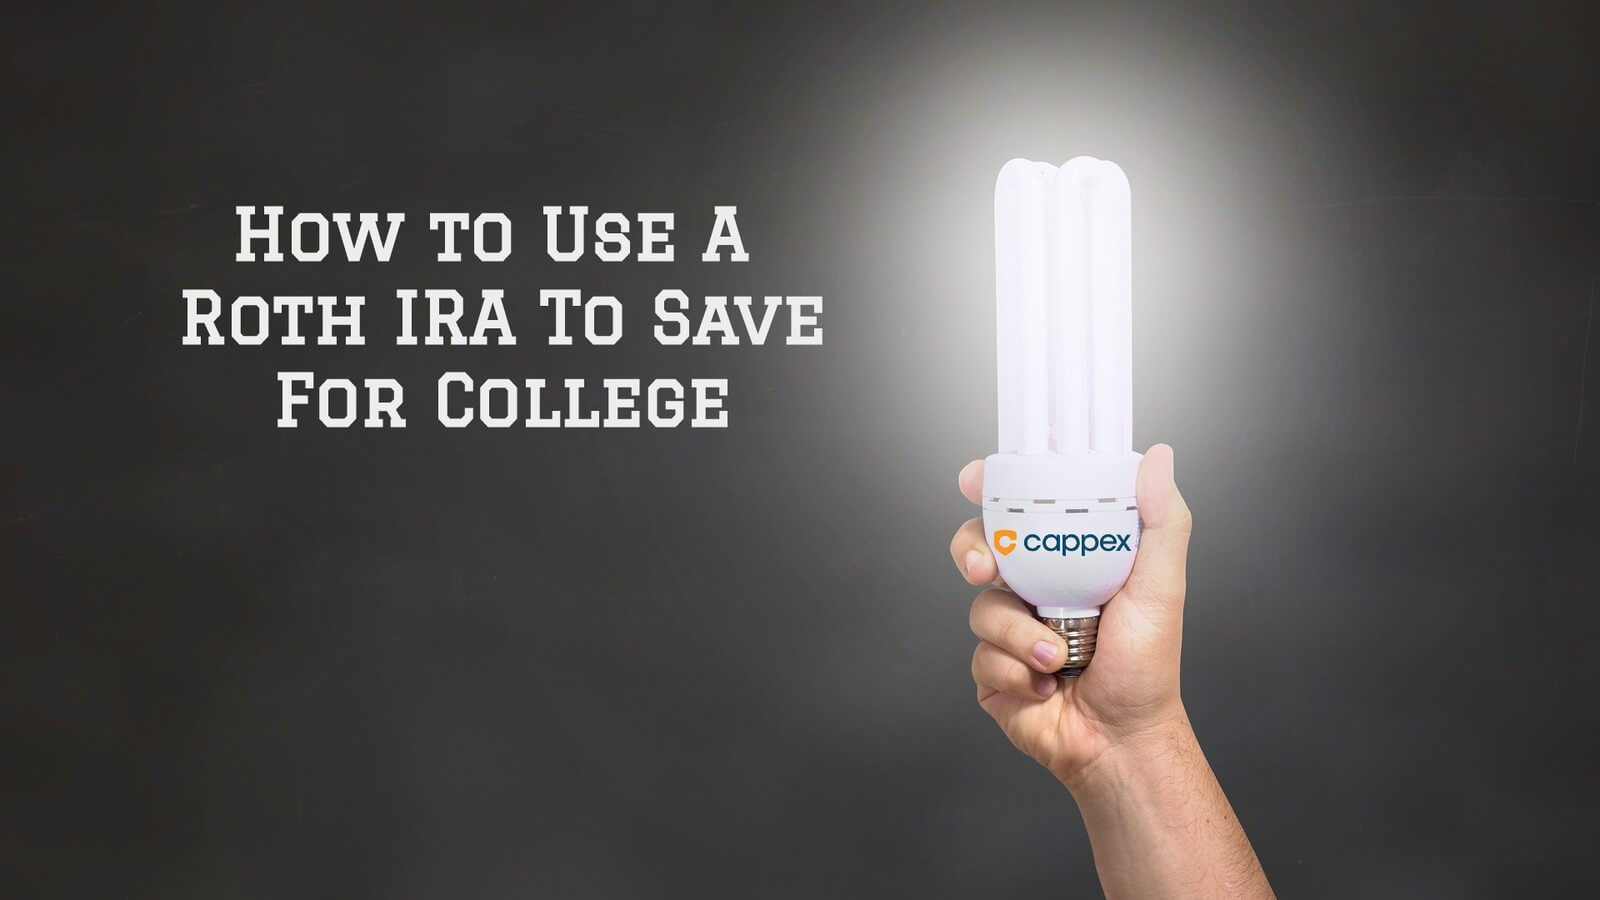 How to Use a Roth IRA to Save for College 